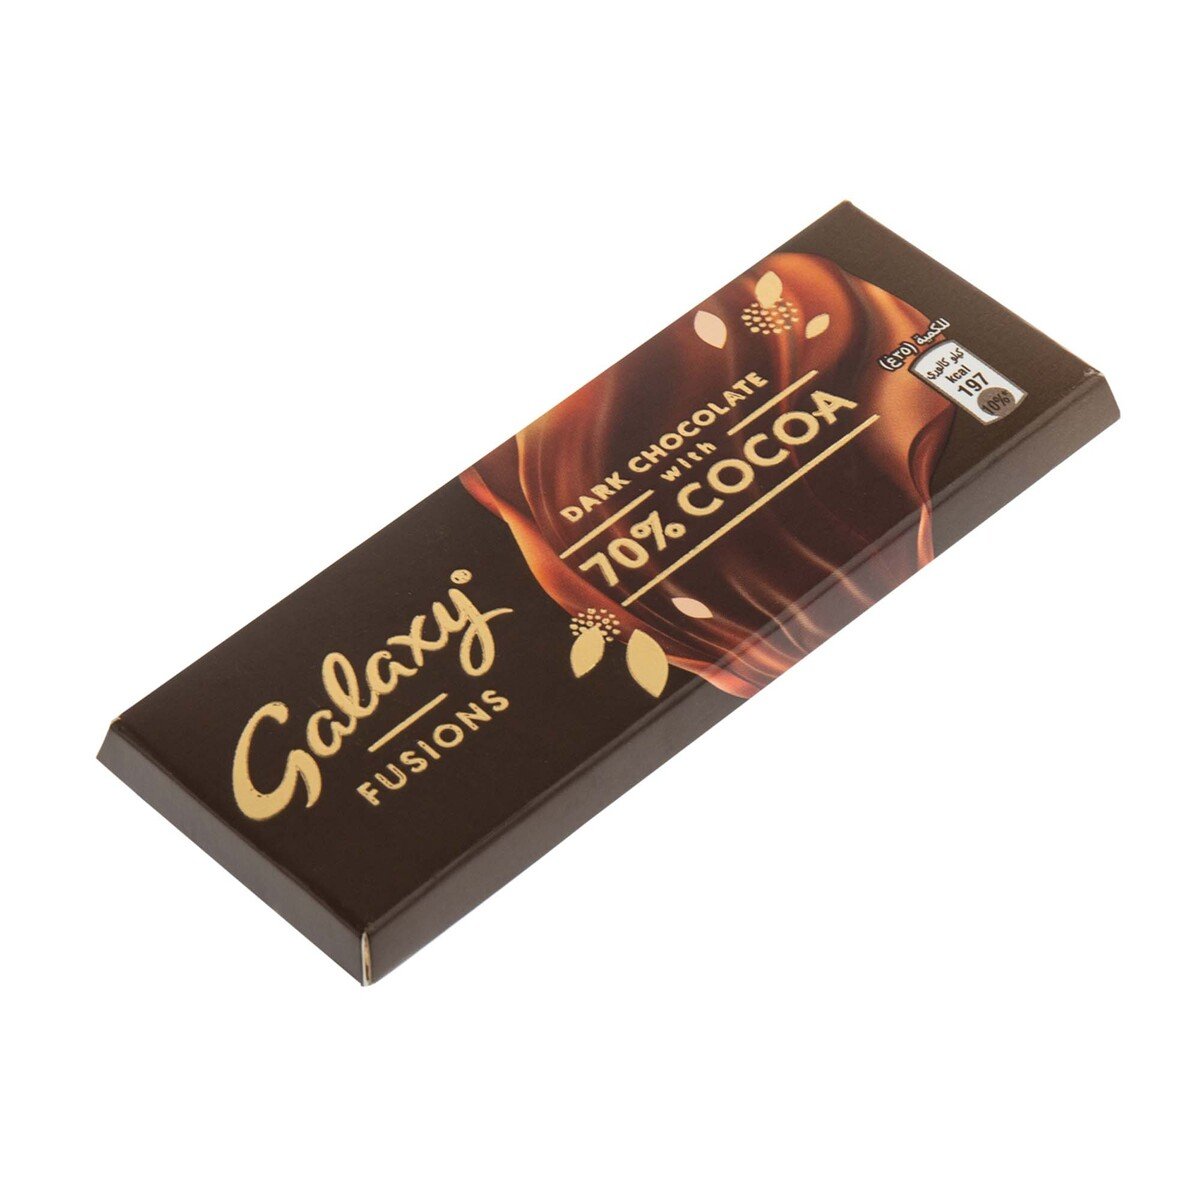 Galaxy Fusions Dark Chocolate With 70% Cocoa 35 g